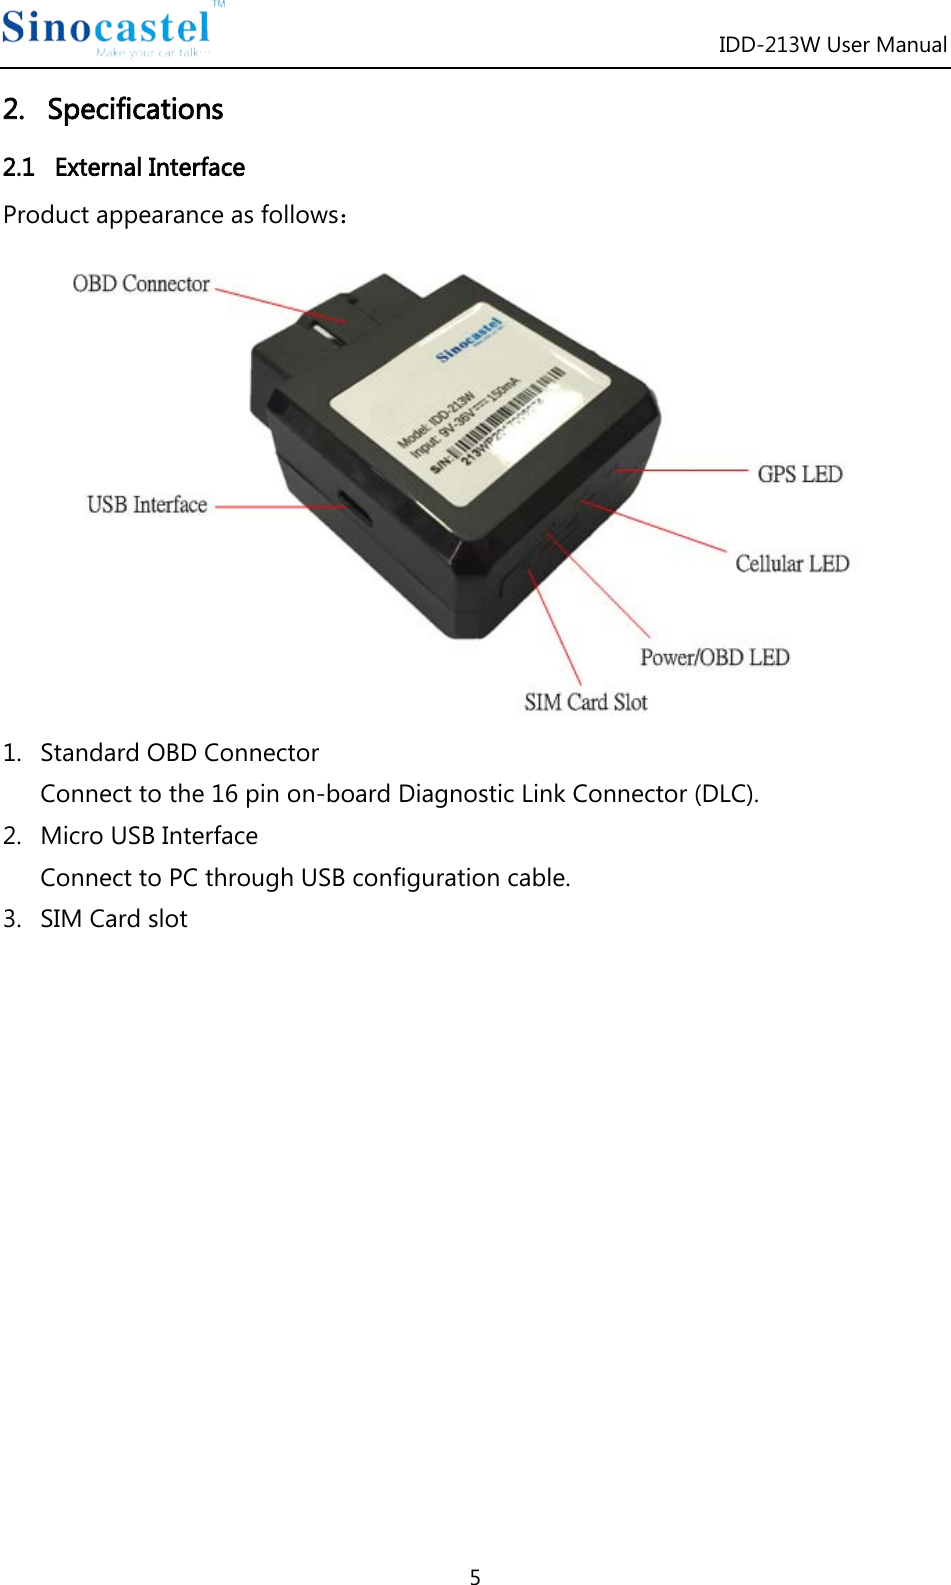 IDD-213W User Manual 5 2.   Specifications 2.1   External Interface Product appearance as follows：  1. Standard OBD Connector Connect to the 16 pin on-board Diagnostic Link Connector (DLC). 2. Micro USB Interface Connect to PC through USB configuration cable. 3. SIM Card slot               